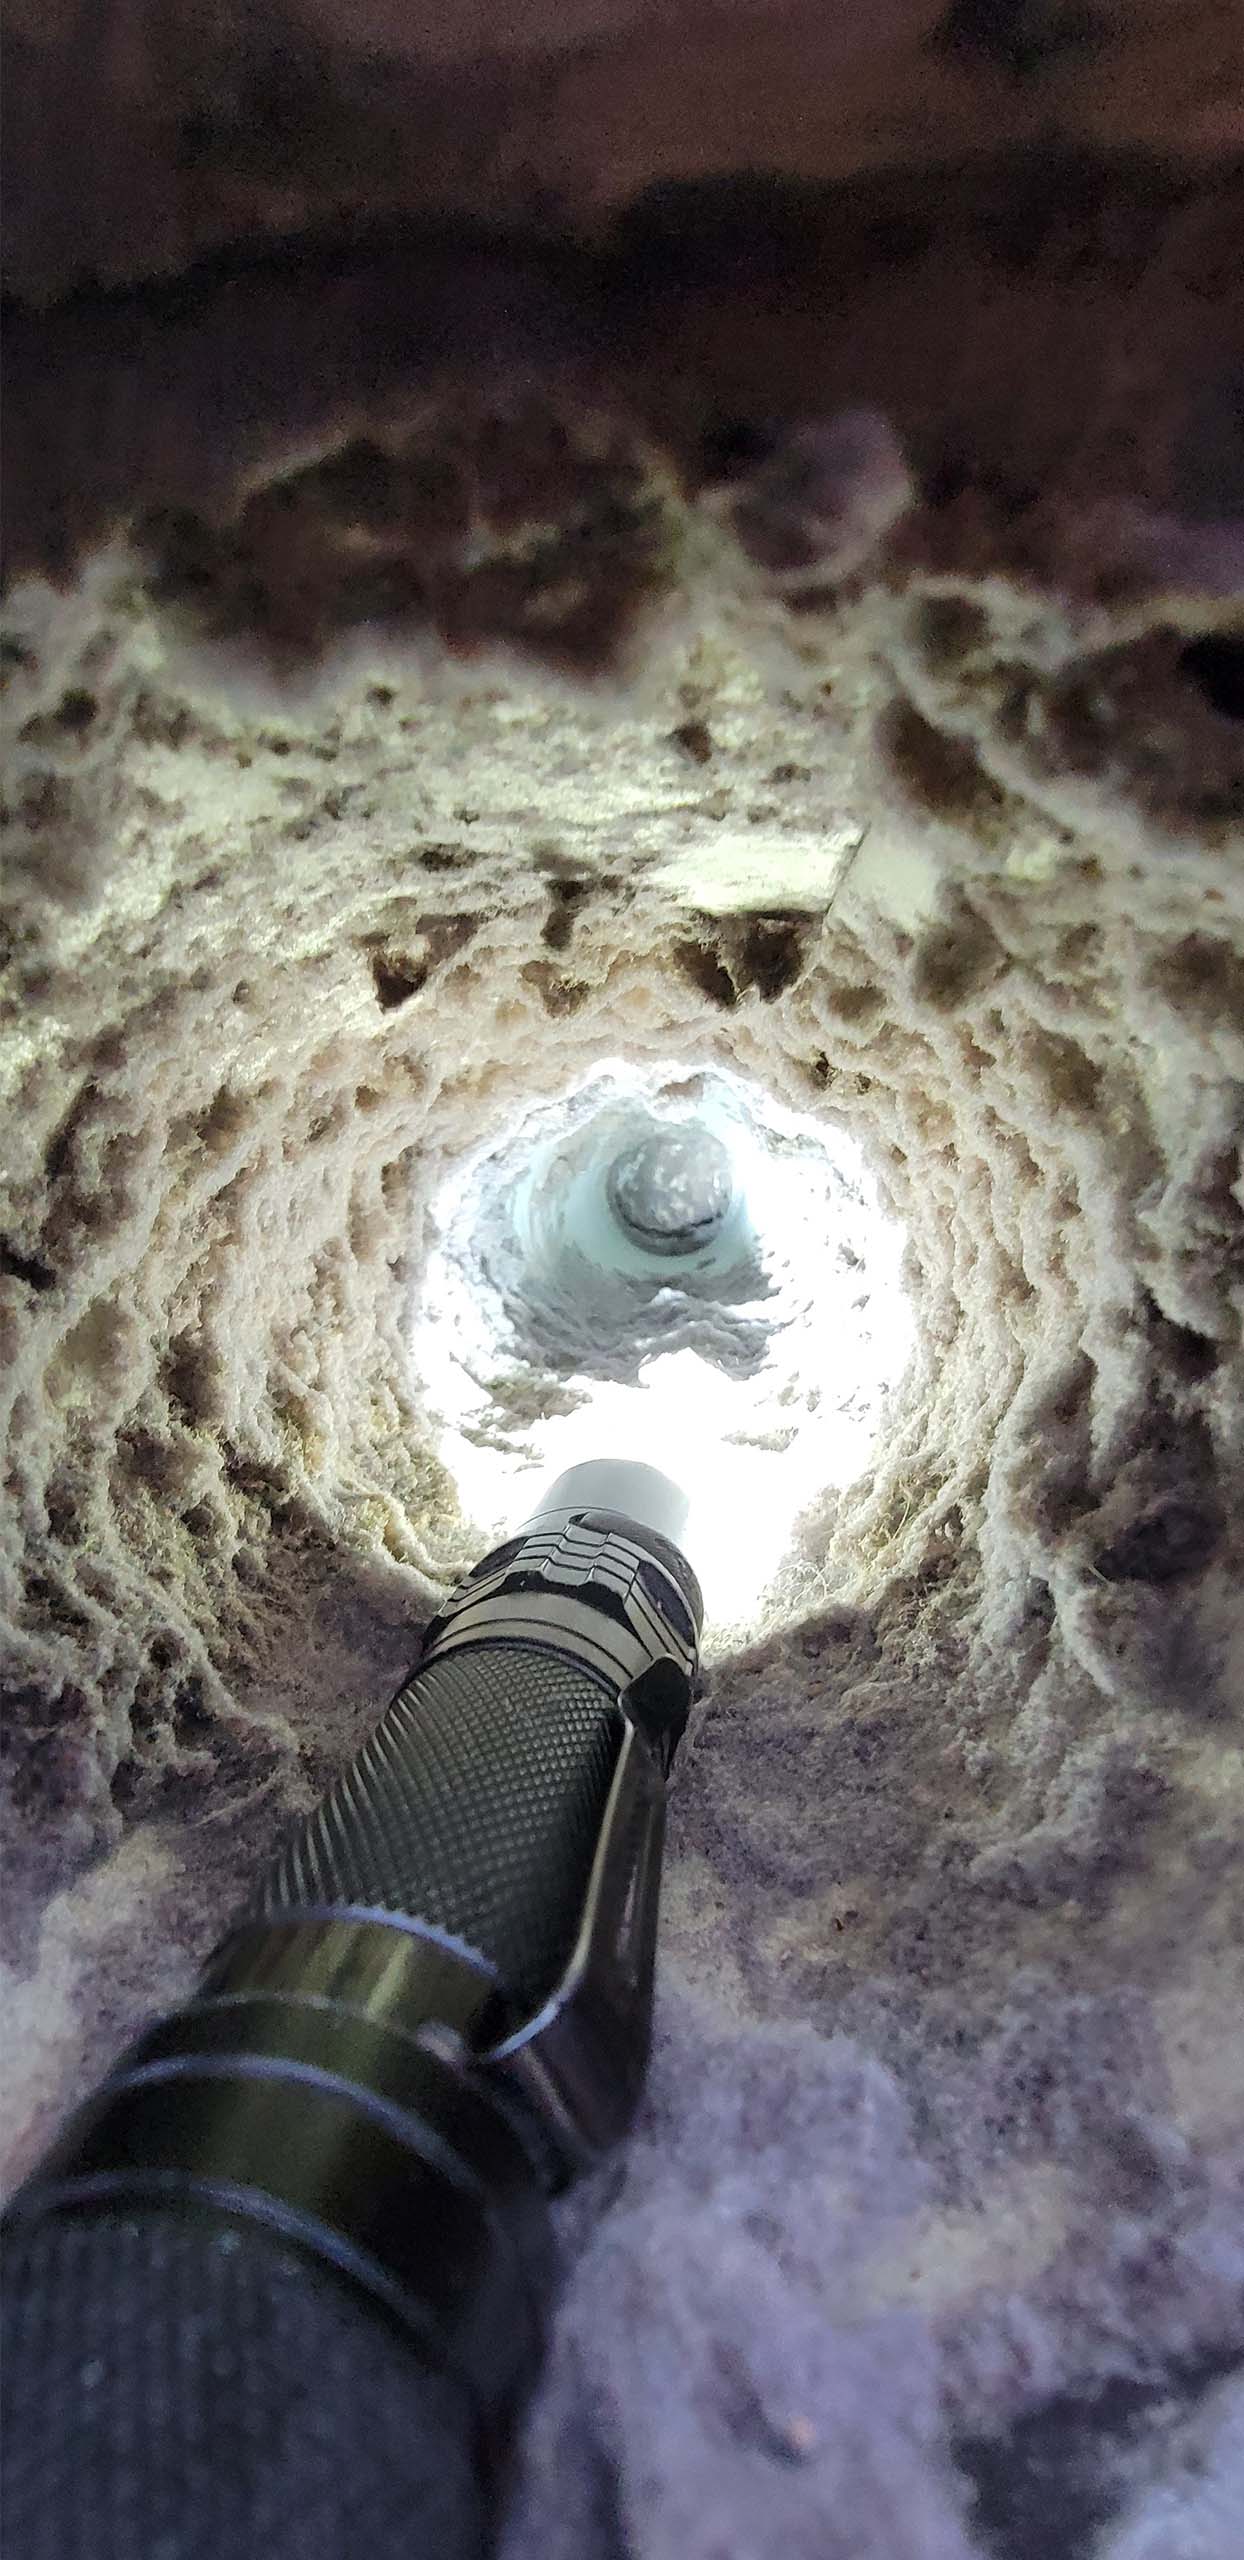 Dryer Vent Cleaning with Daves dryer vent cleaning